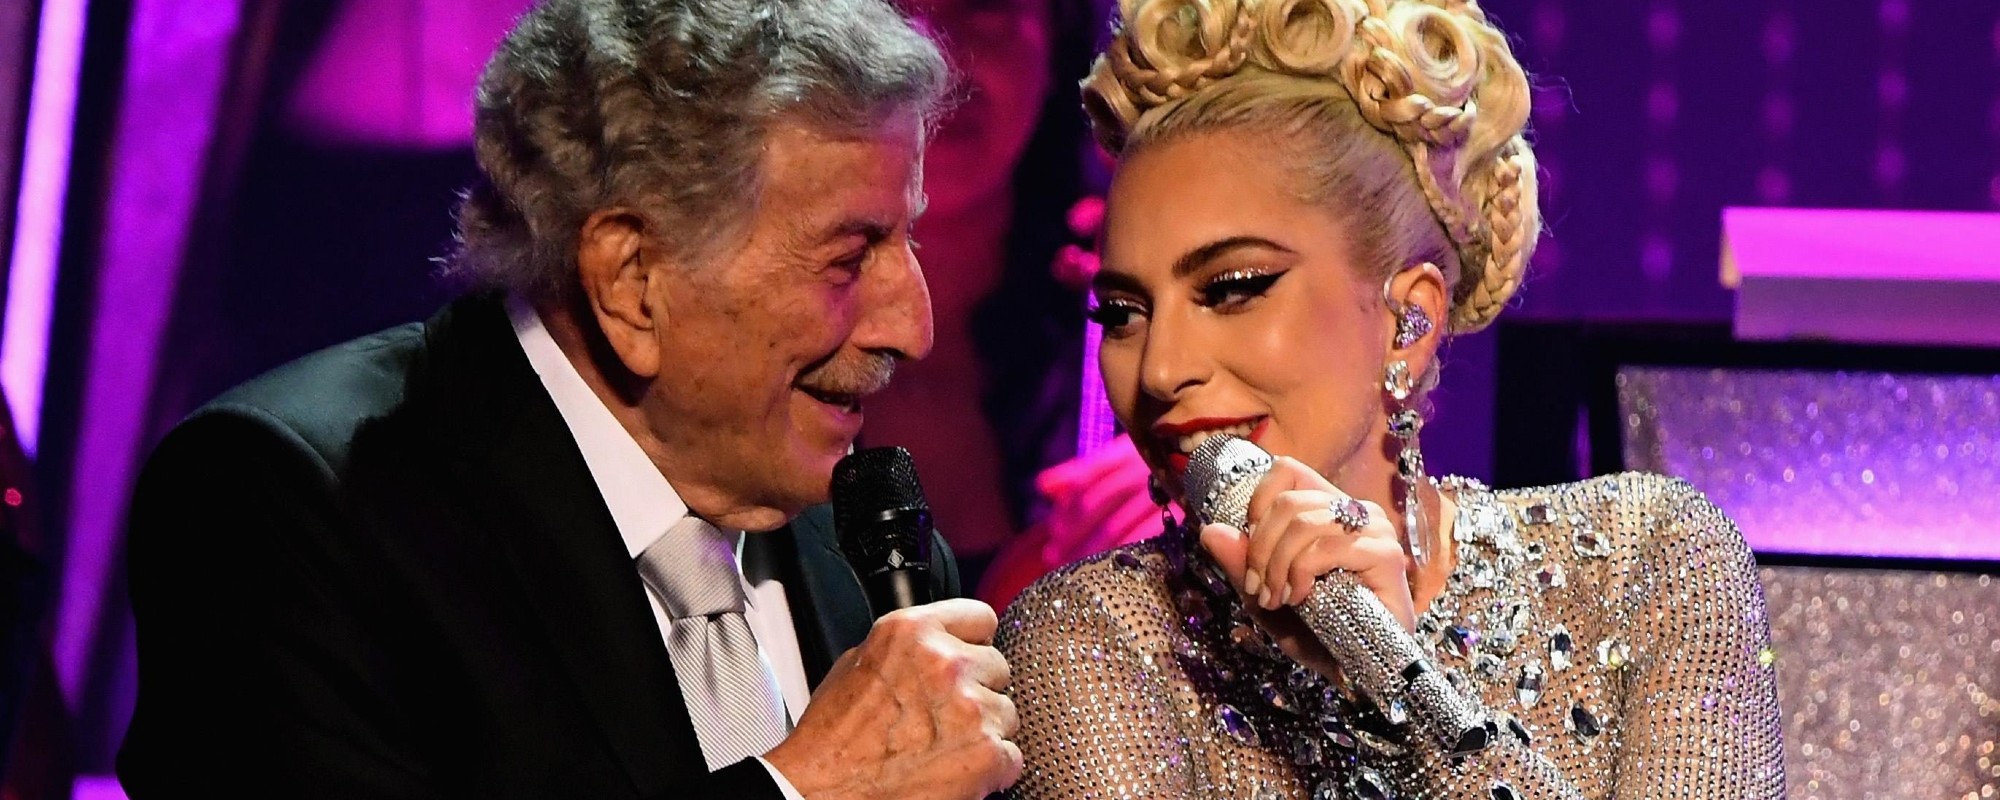 Lady Gaga & Tony Bennett Reunite For Cole Porter Tribute Album, Release “I Get A Kick Out Of You”